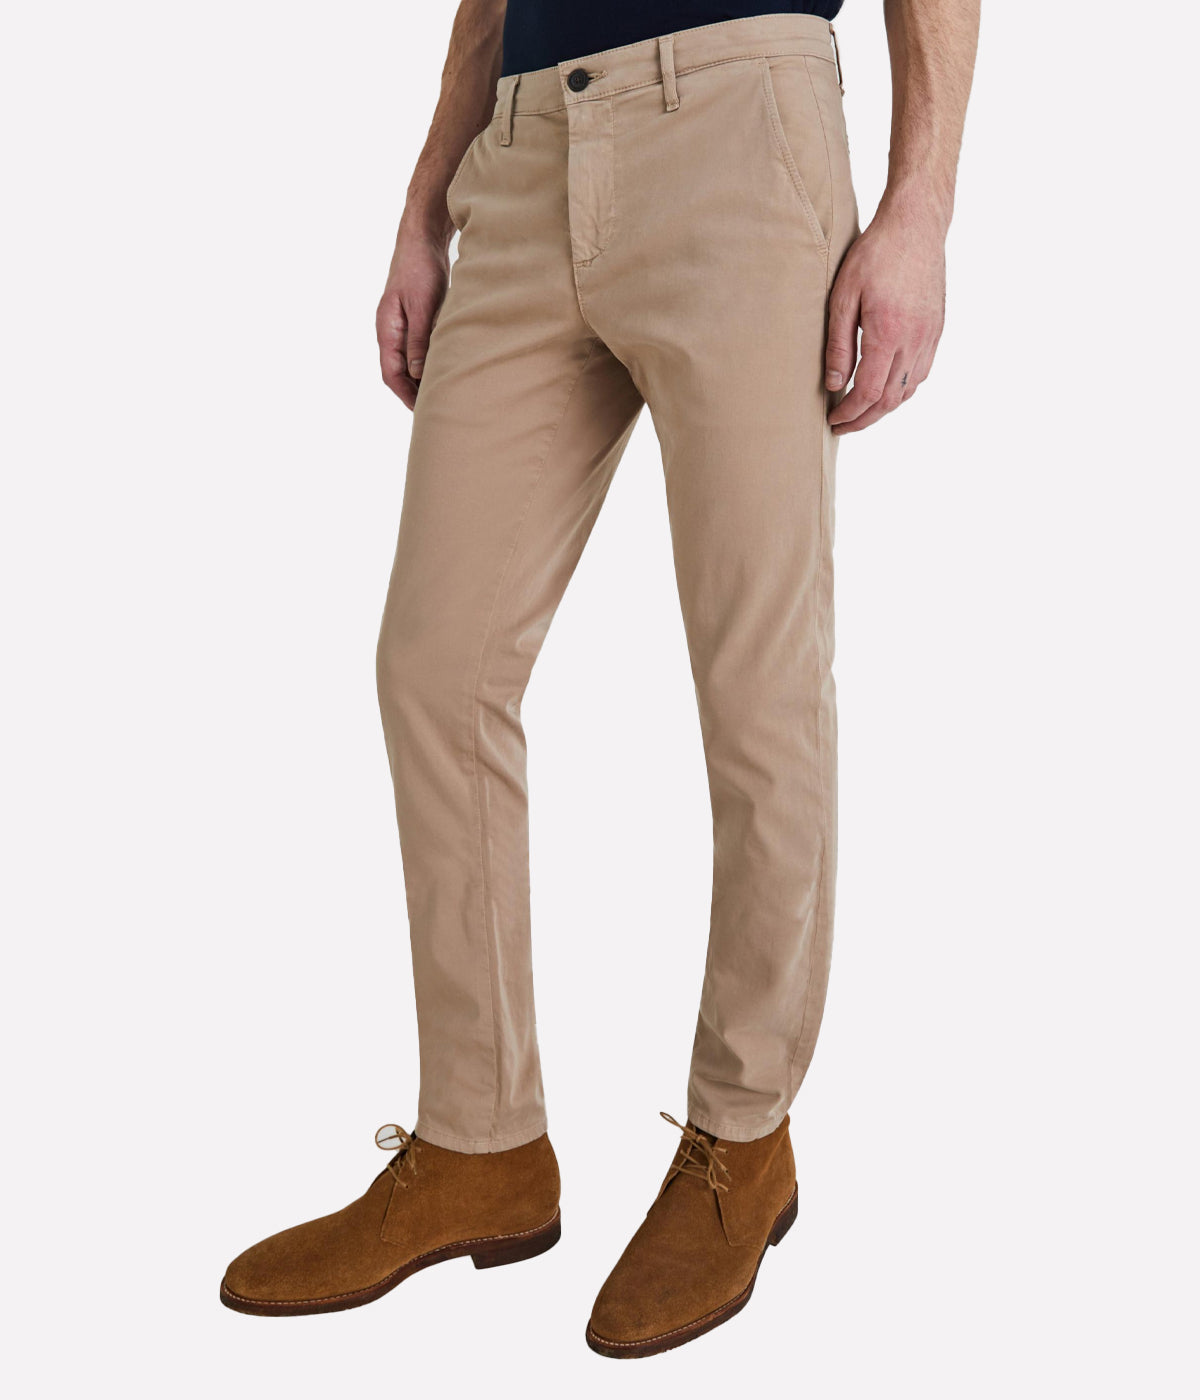 Jamison Skinny Chino in Parched Trail